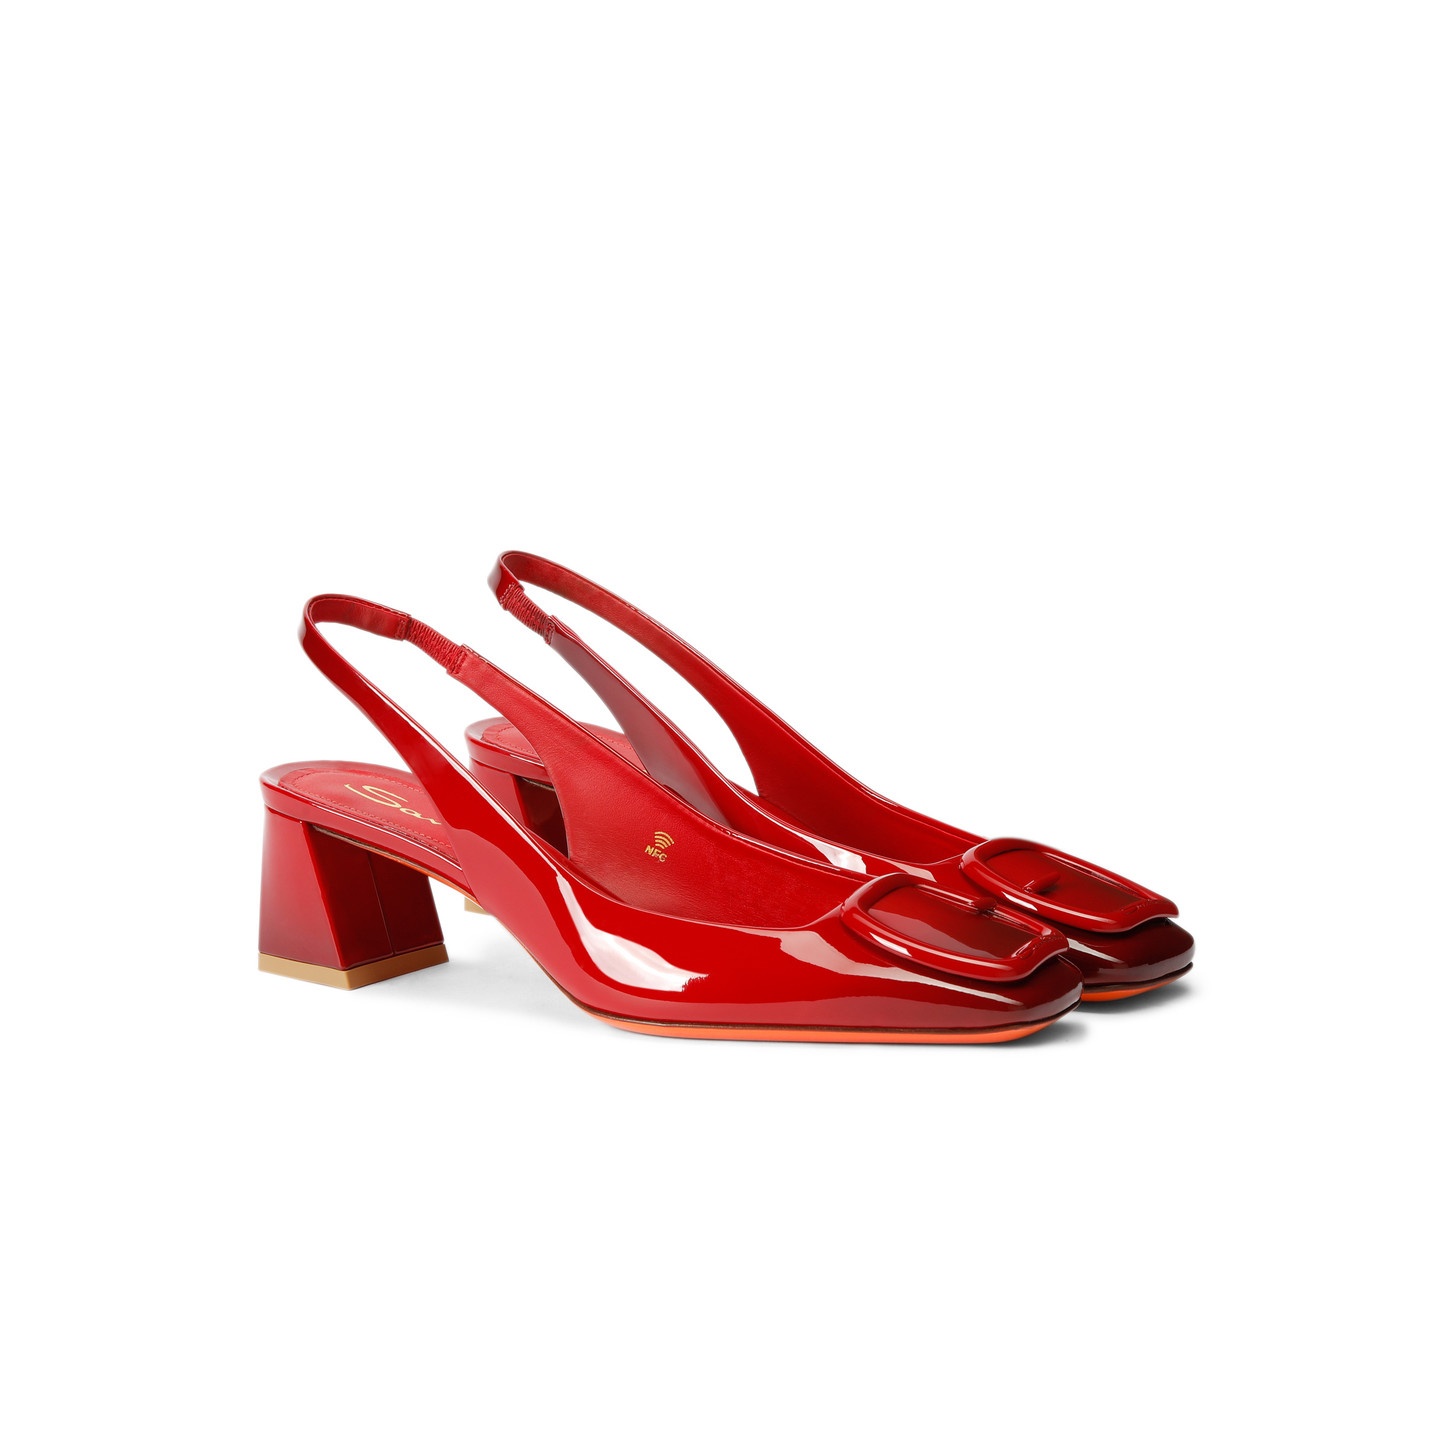 Women's red patent leather mid-heel slingback - 2